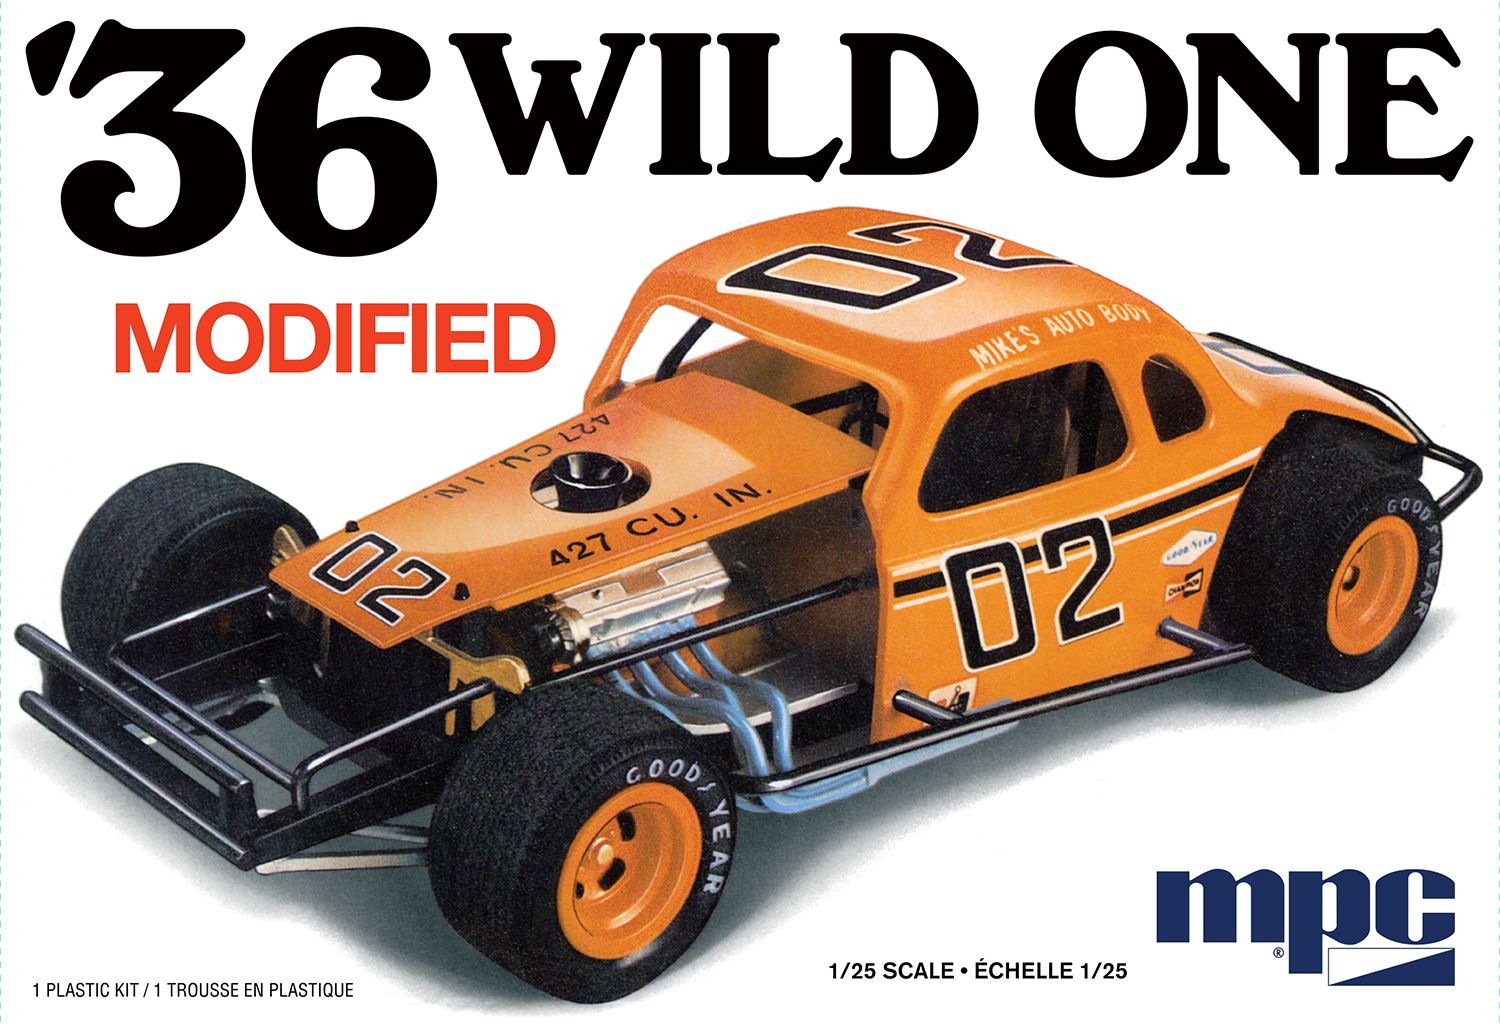 MPC 1/25 Scale 1936 Wild One Modified 2T Model Kit